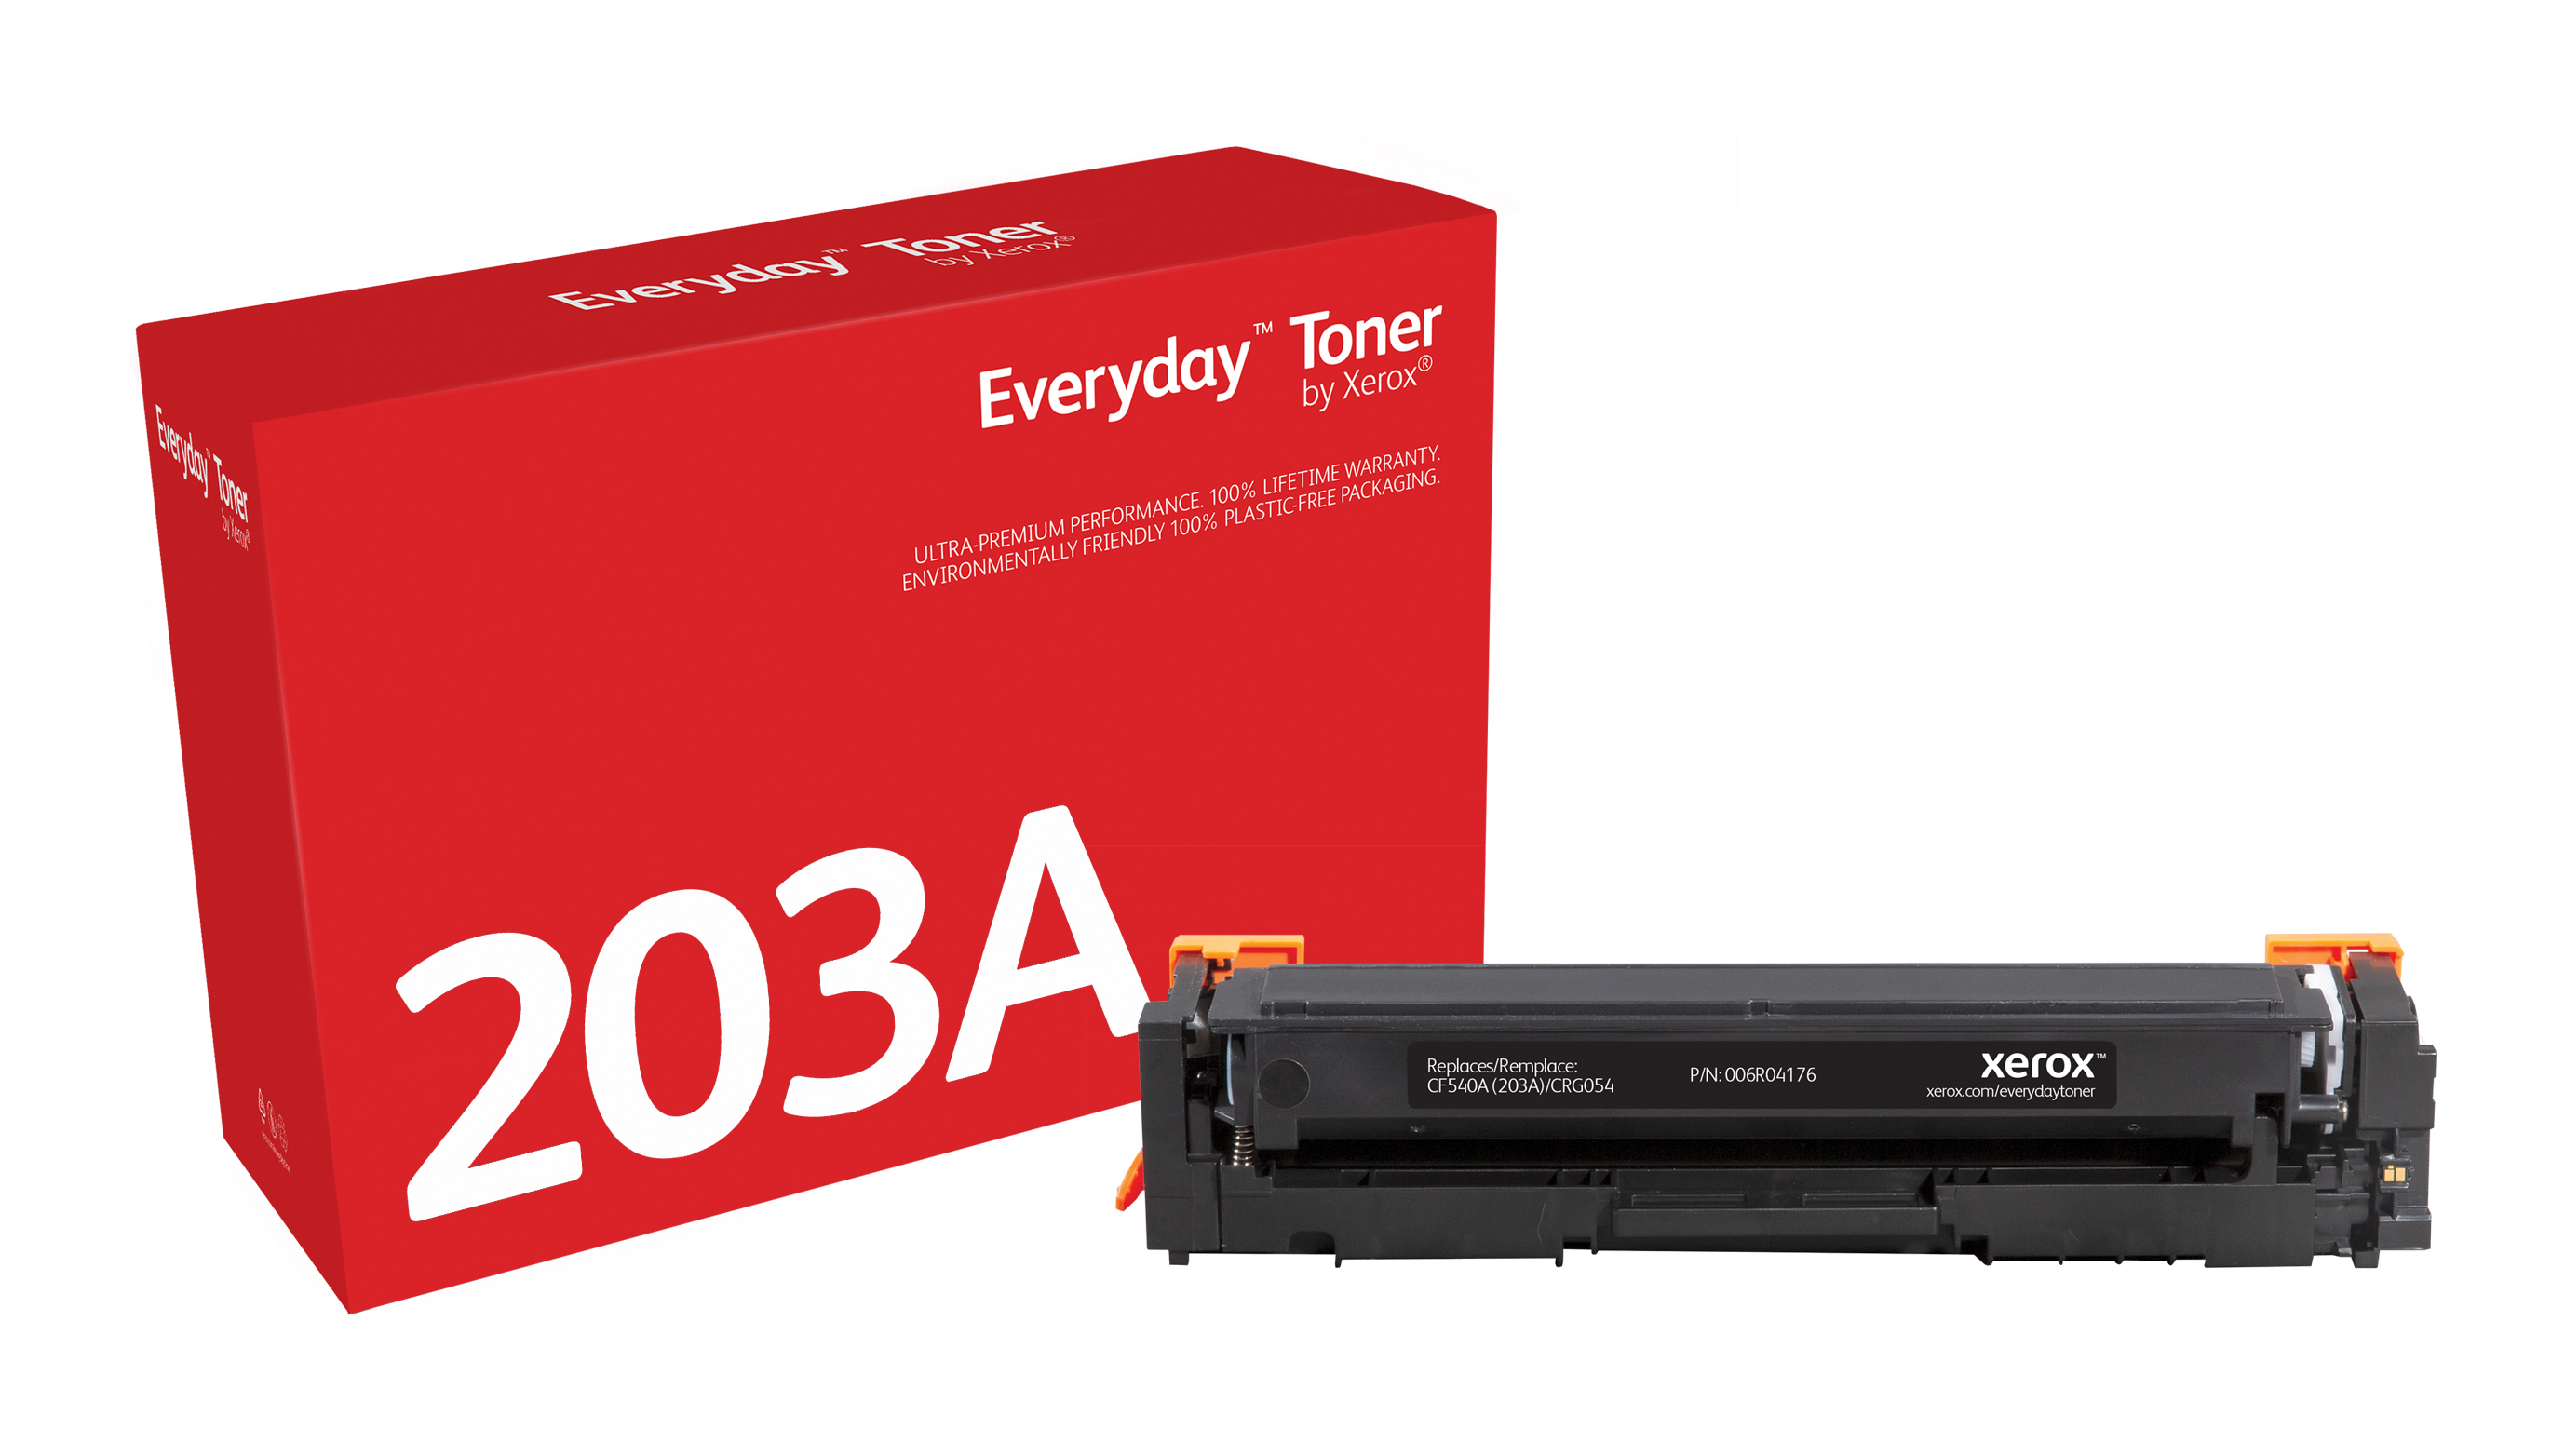 Everyday Black Toner compatible with HP CF540A/CRG-054BK 006R04176 by Xerox